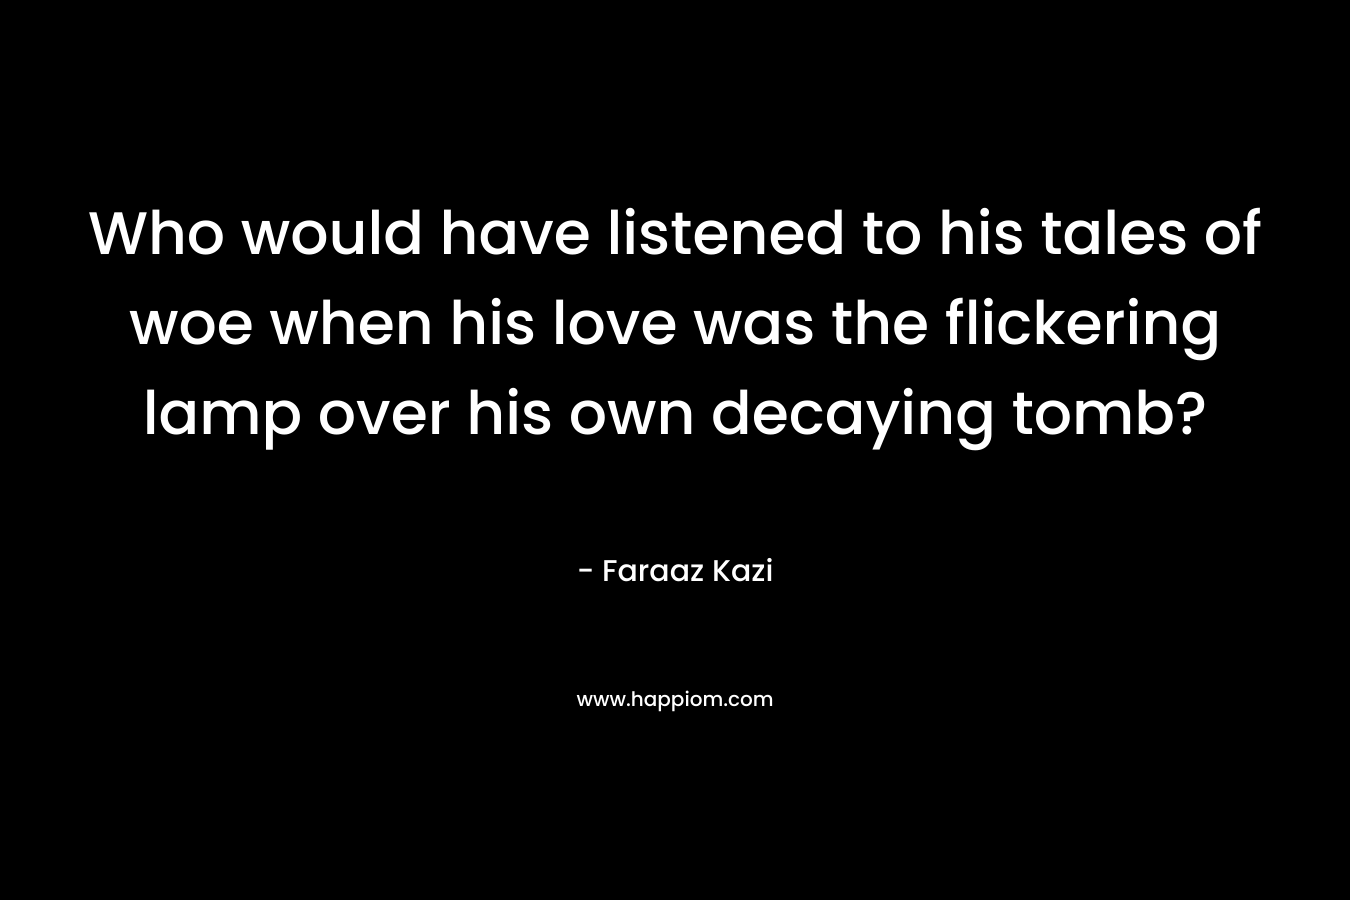 Who would have listened to his tales of woe when his love was the flickering lamp over his own decaying tomb? – Faraaz Kazi